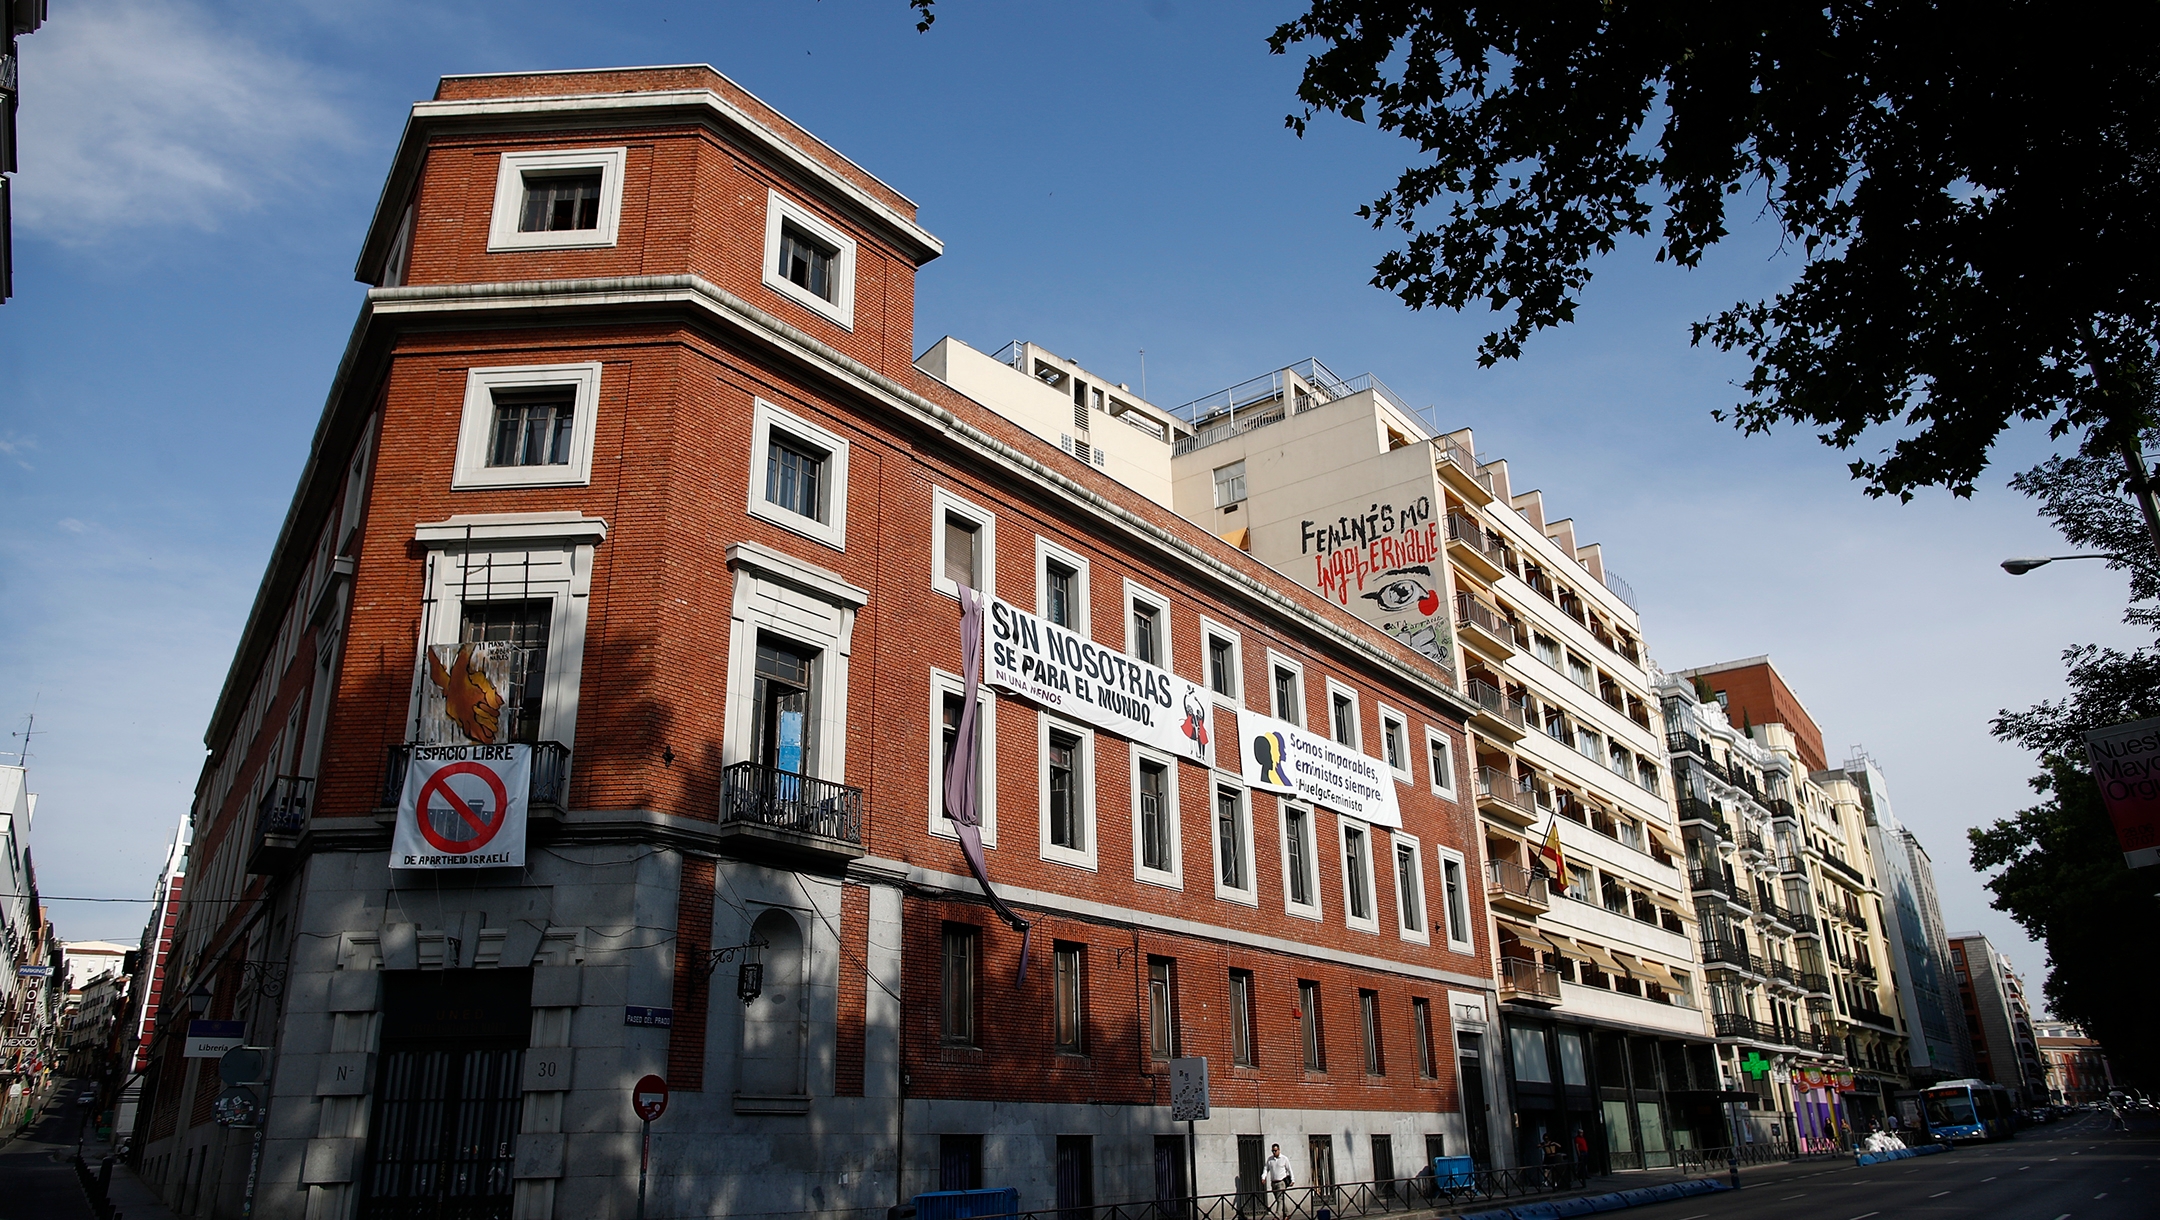 The building known as The Ungovernable, which will become the Jewish Museum in Madrid, Spain, pictured while still illegally occupied by far-left activists on July 4, 2019 (Eduardo Parra/Europa Press via Getty Pictures)